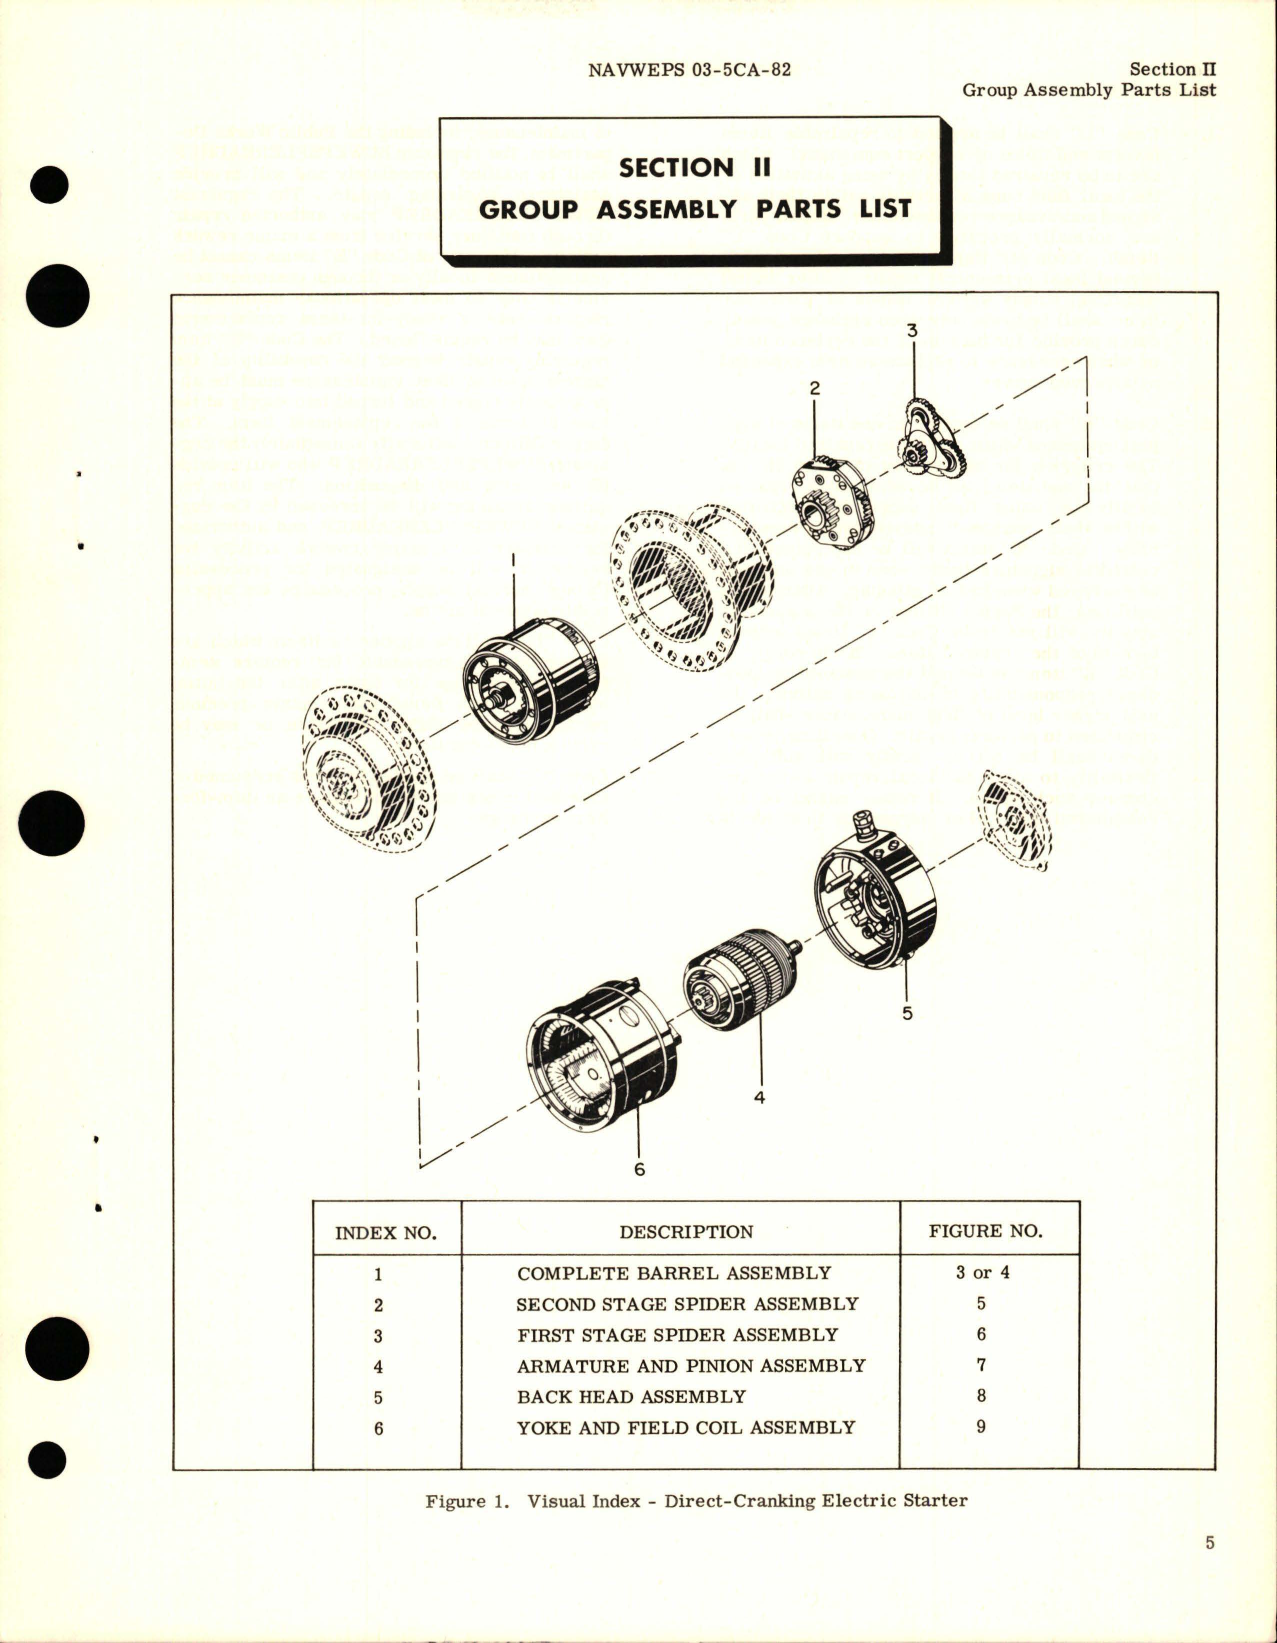 Sample page 7 from AirCorps Library document: Illustrated Parts Breakdown for Direct-Cranking Electric Starter 